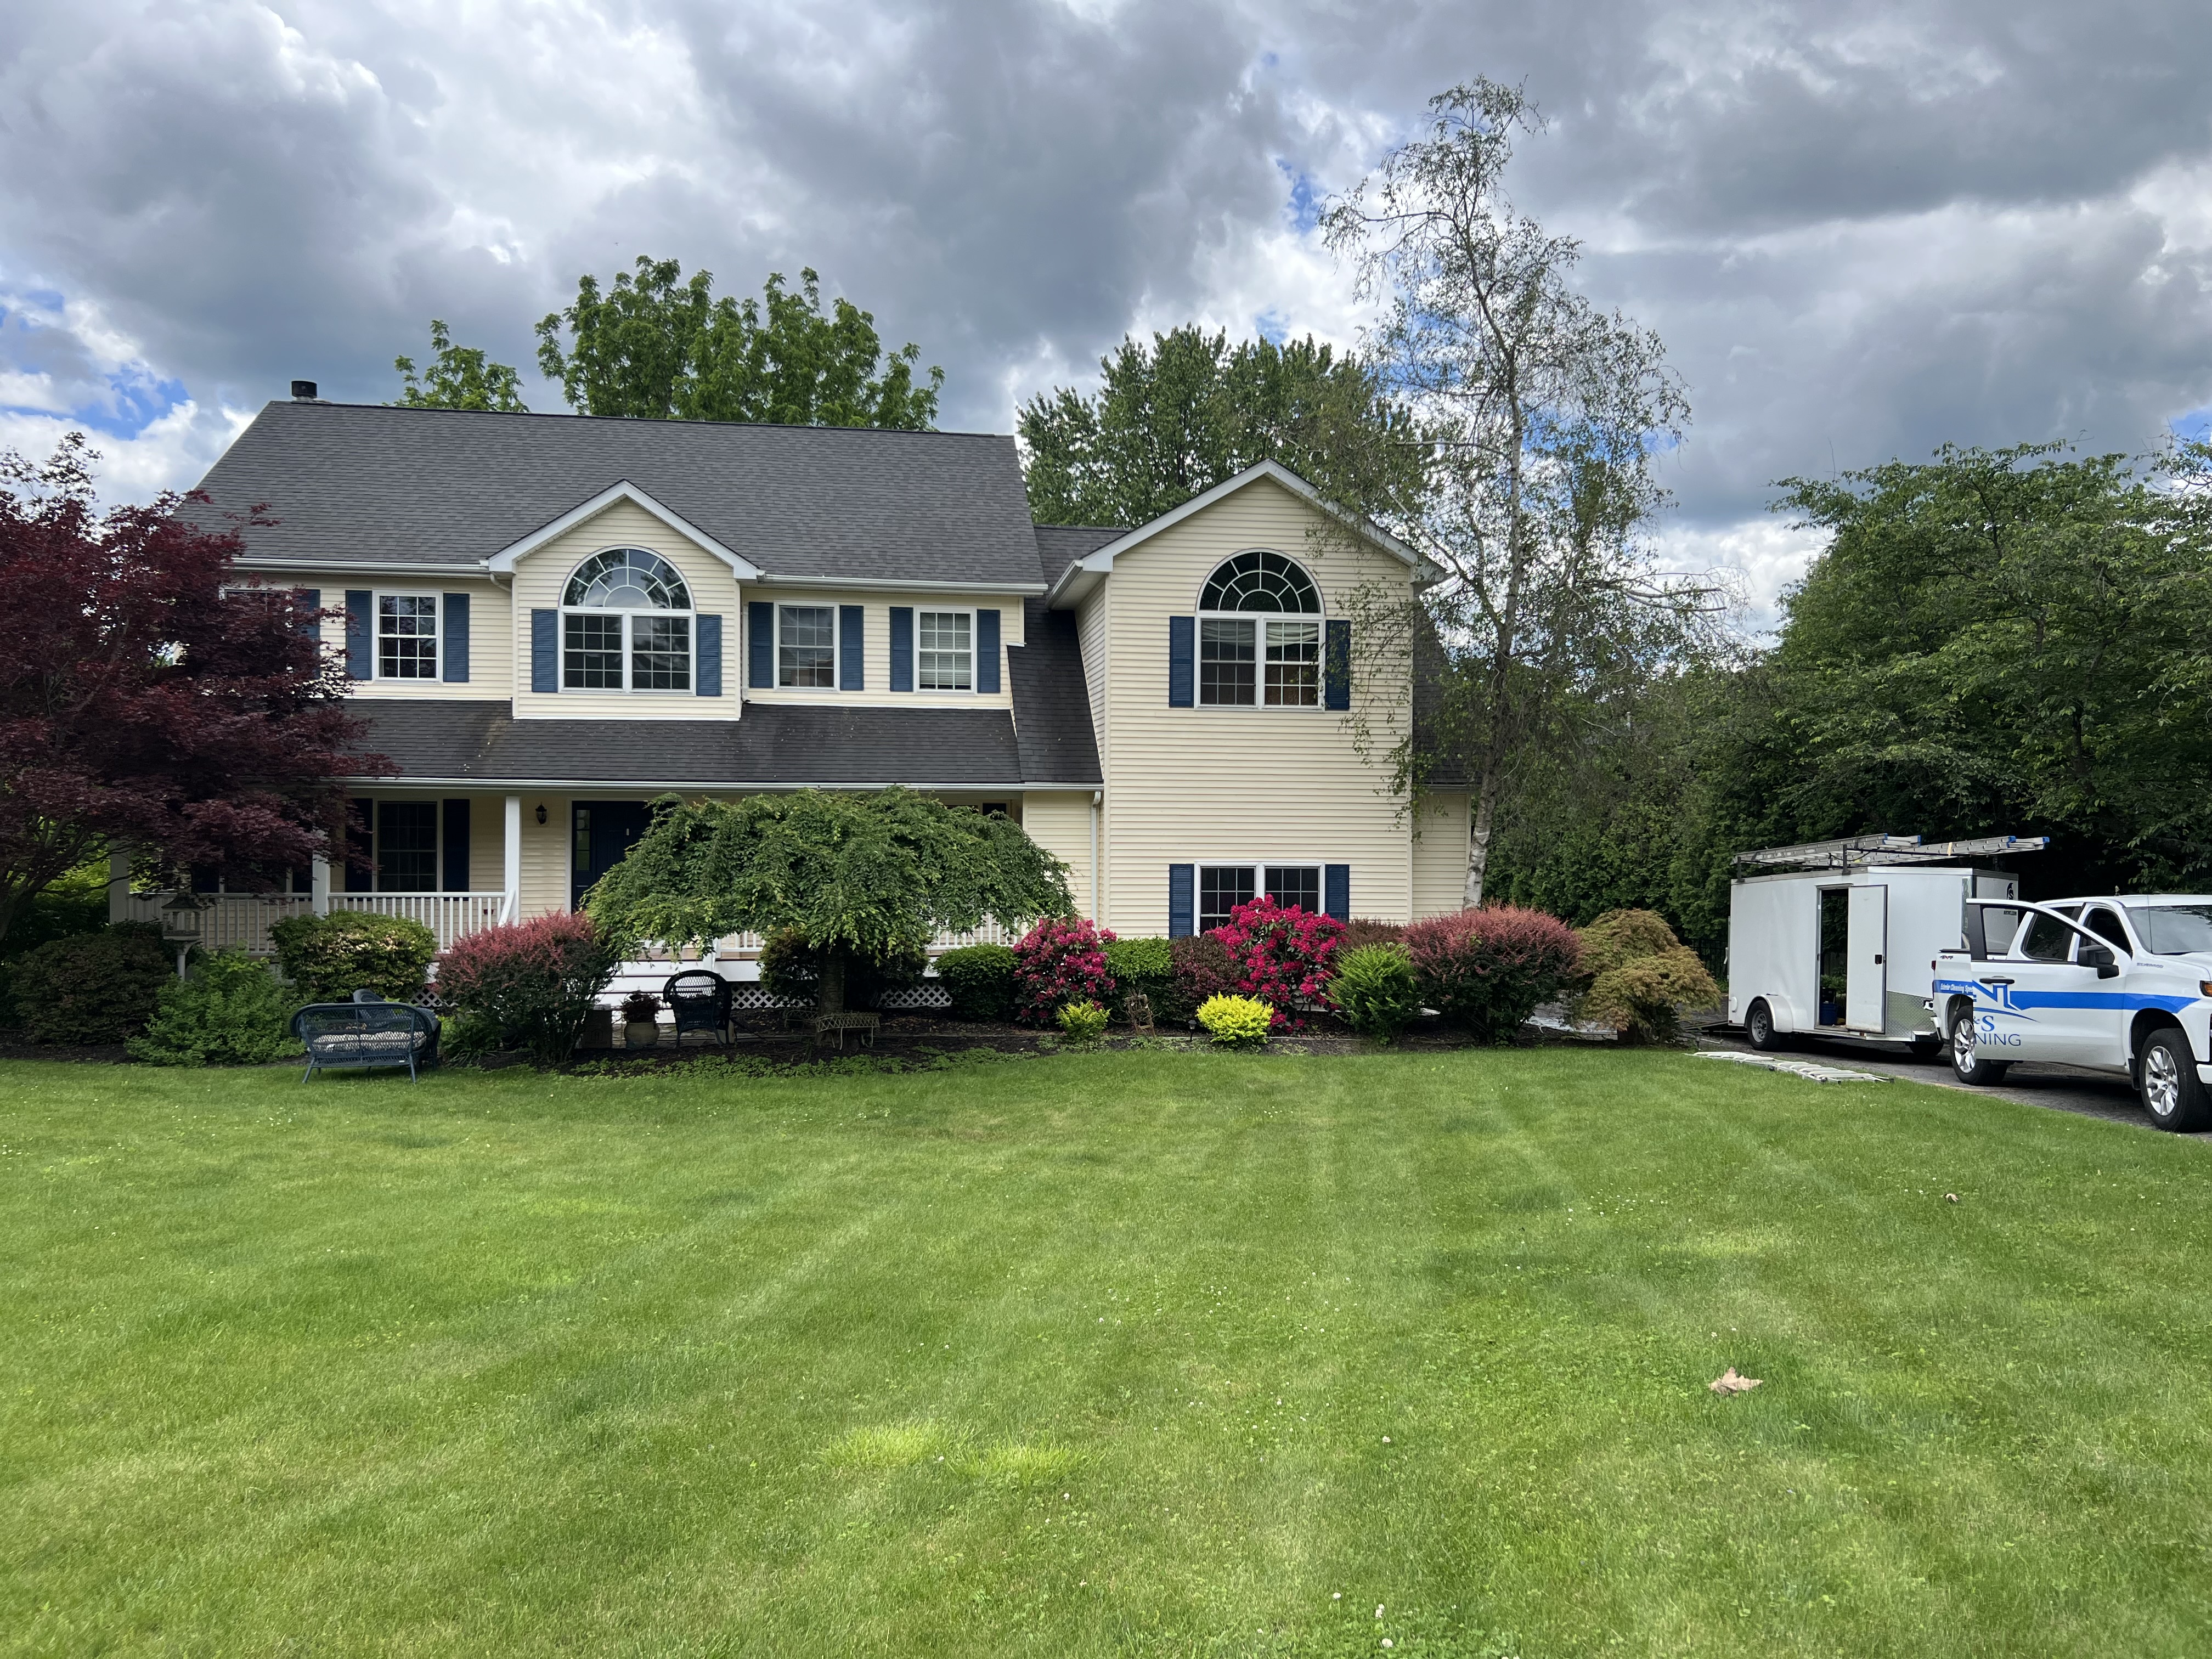 House wash in Hopewell Junction New York